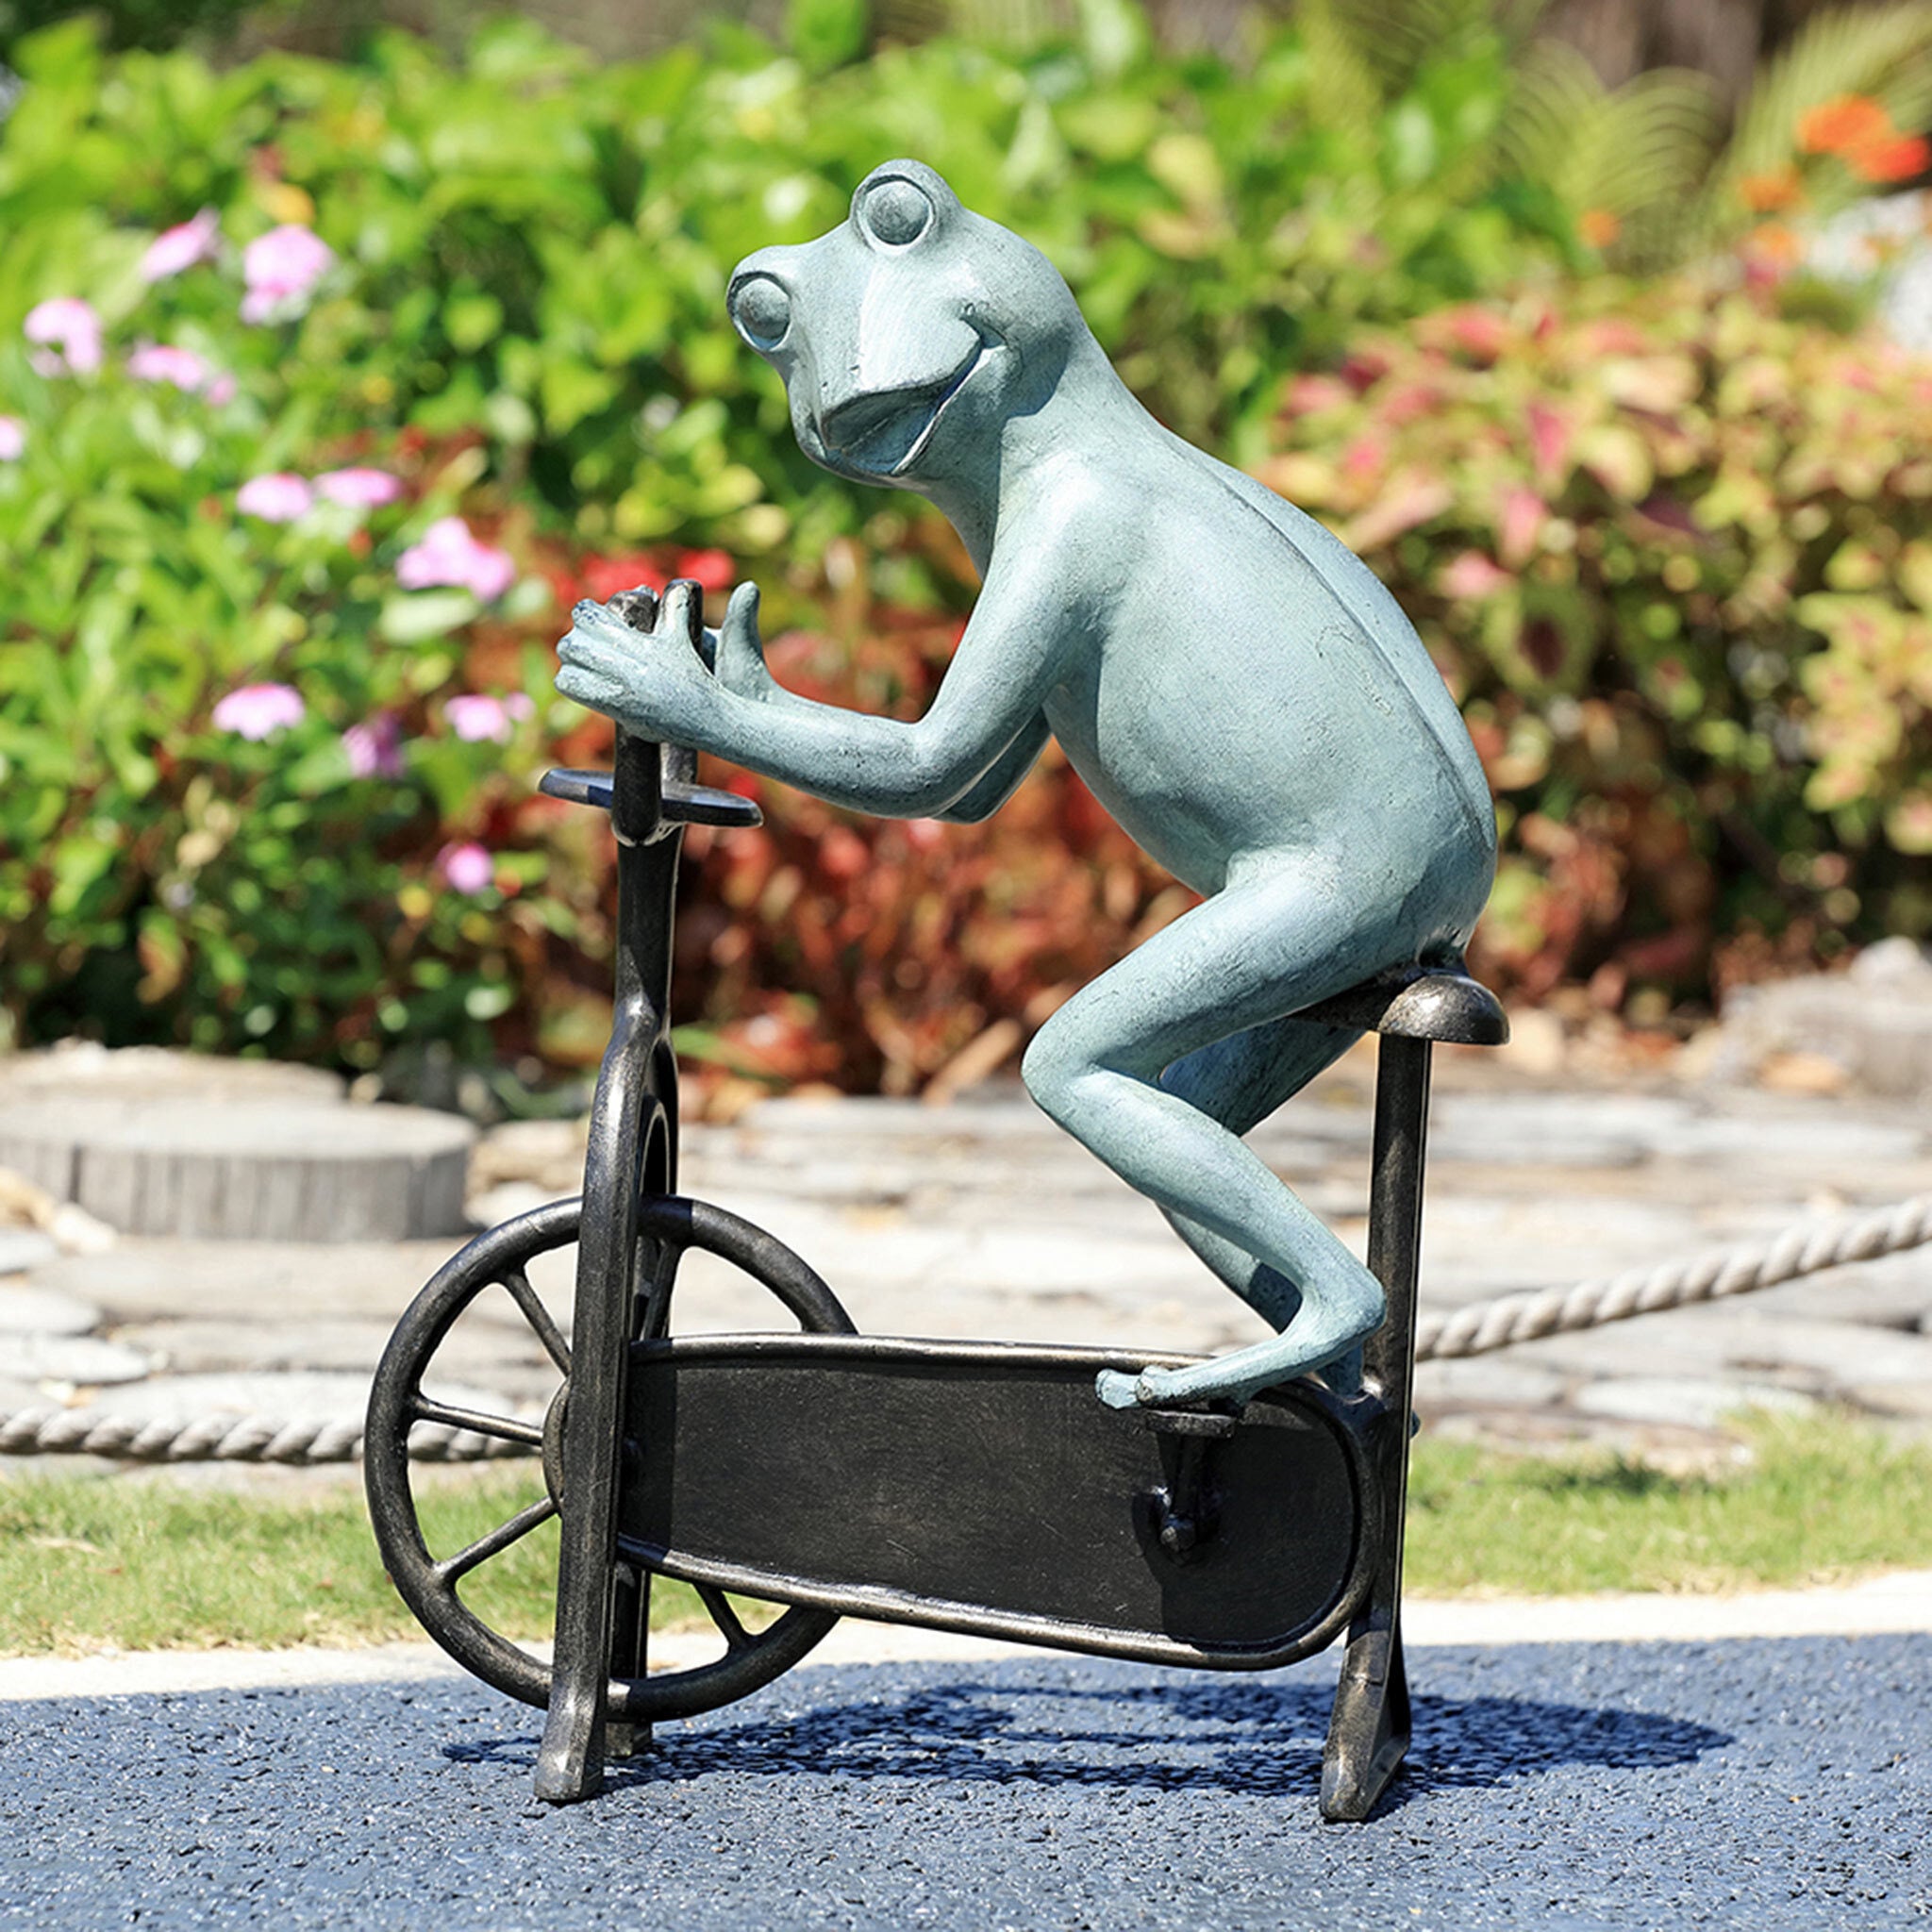 Workout Frog on Bicycle Garden Sculpture